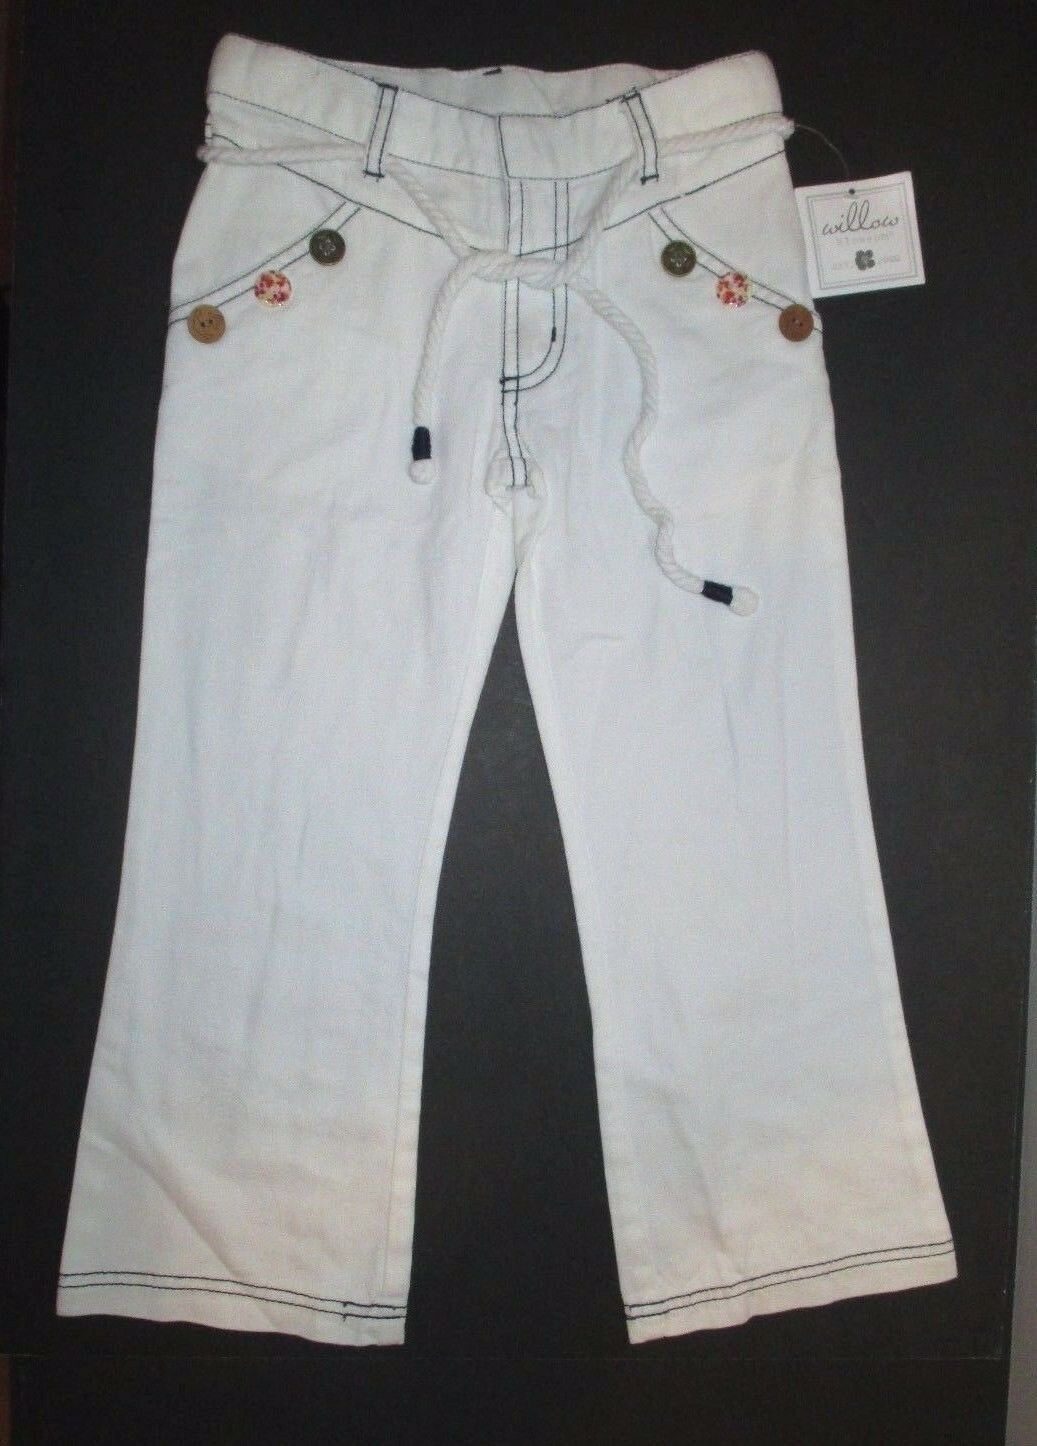 New Nwt Girls Willow Blossom White Nautical Rope Belt Pants Size 5